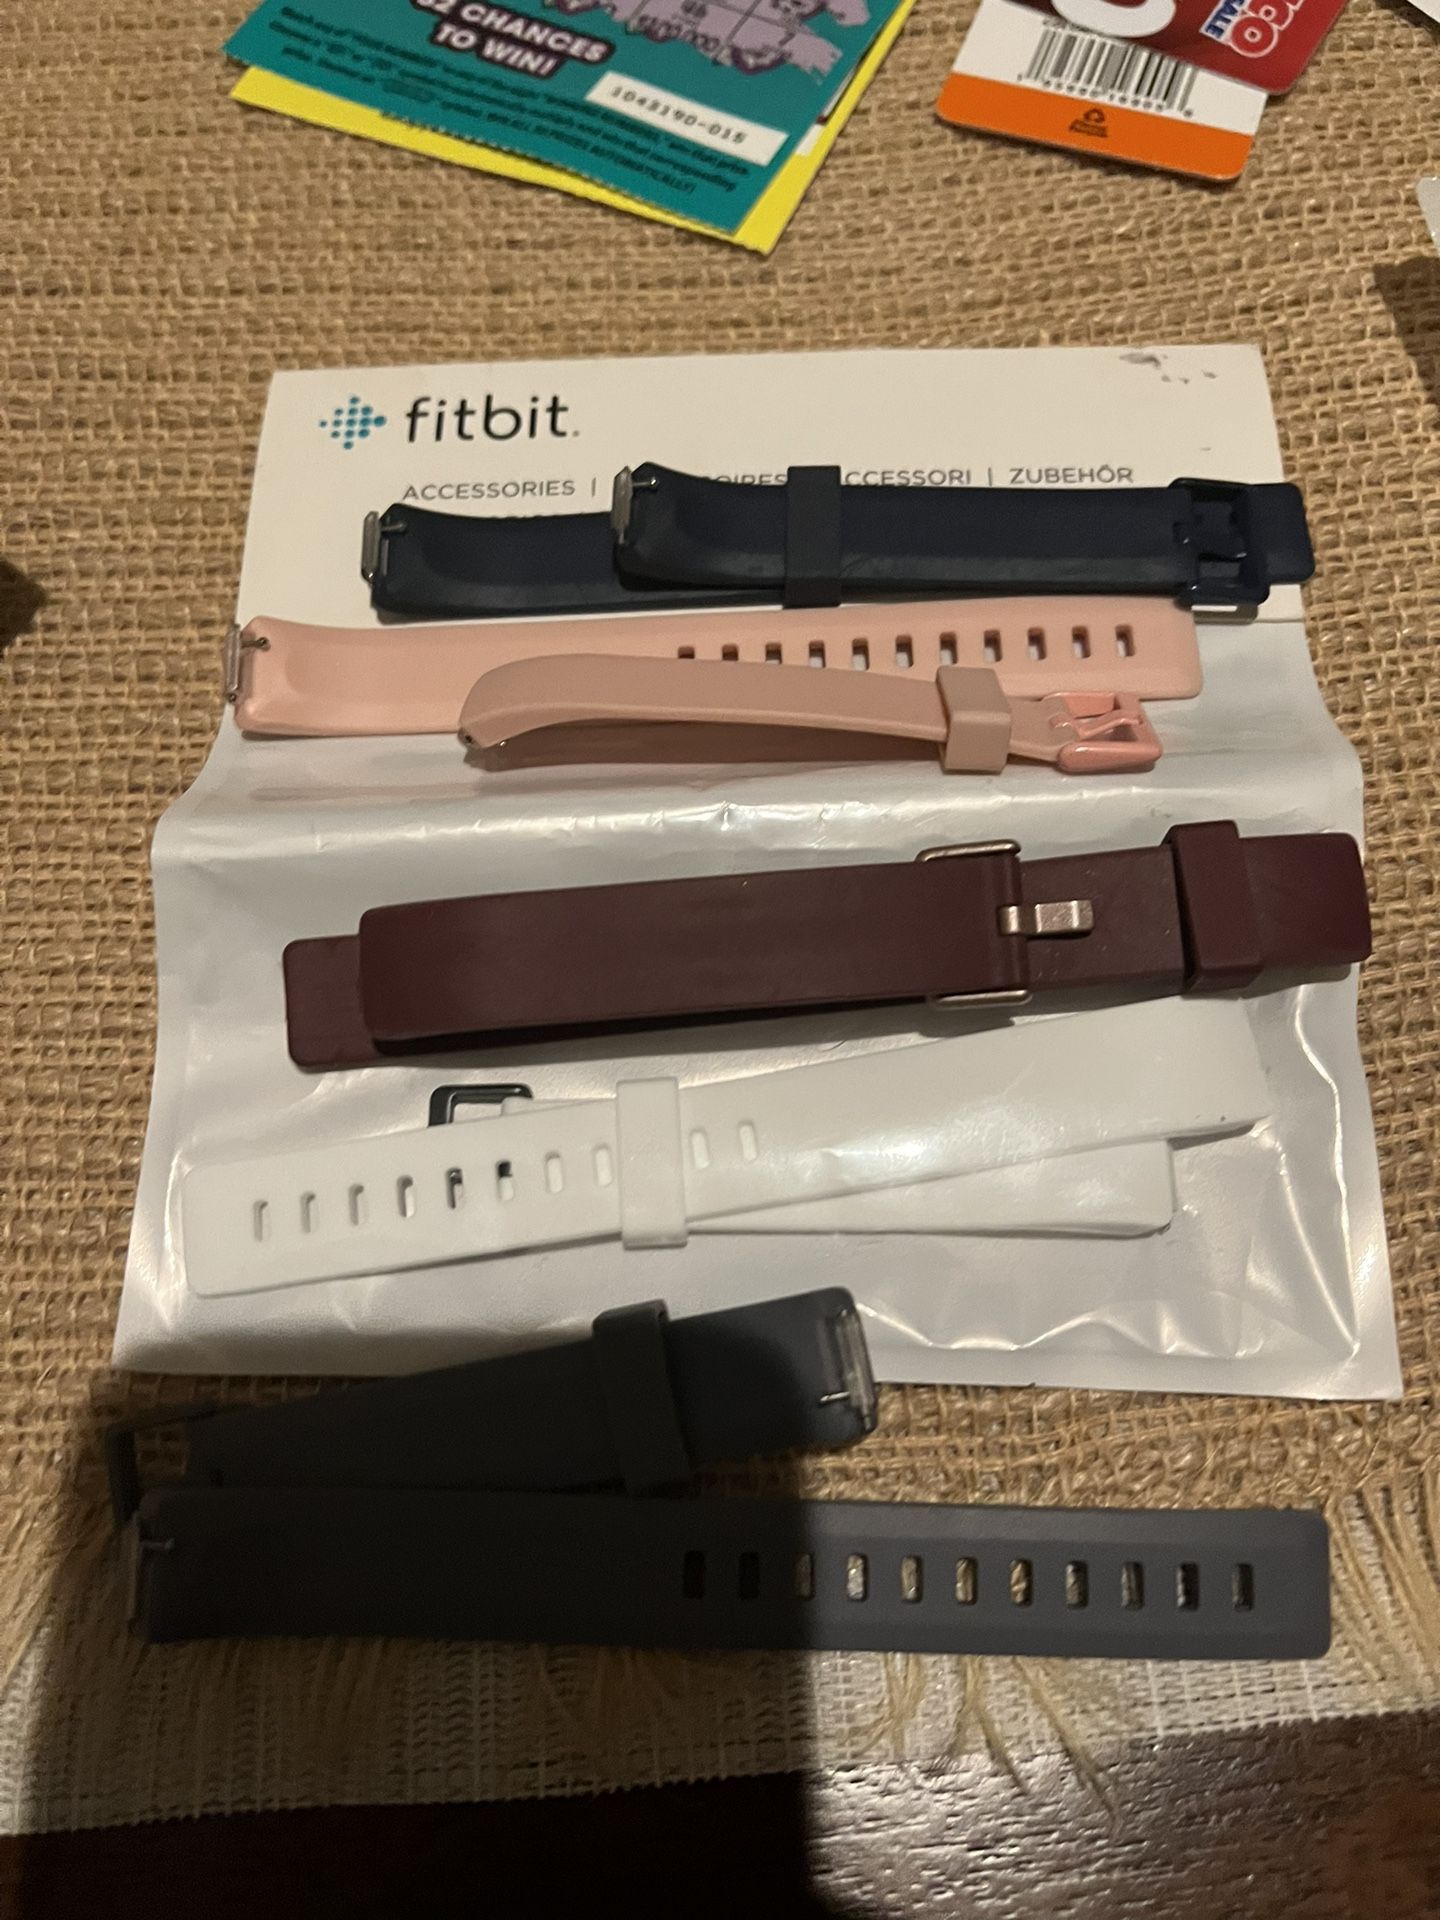 Fitbit Accessories 5 Bands 